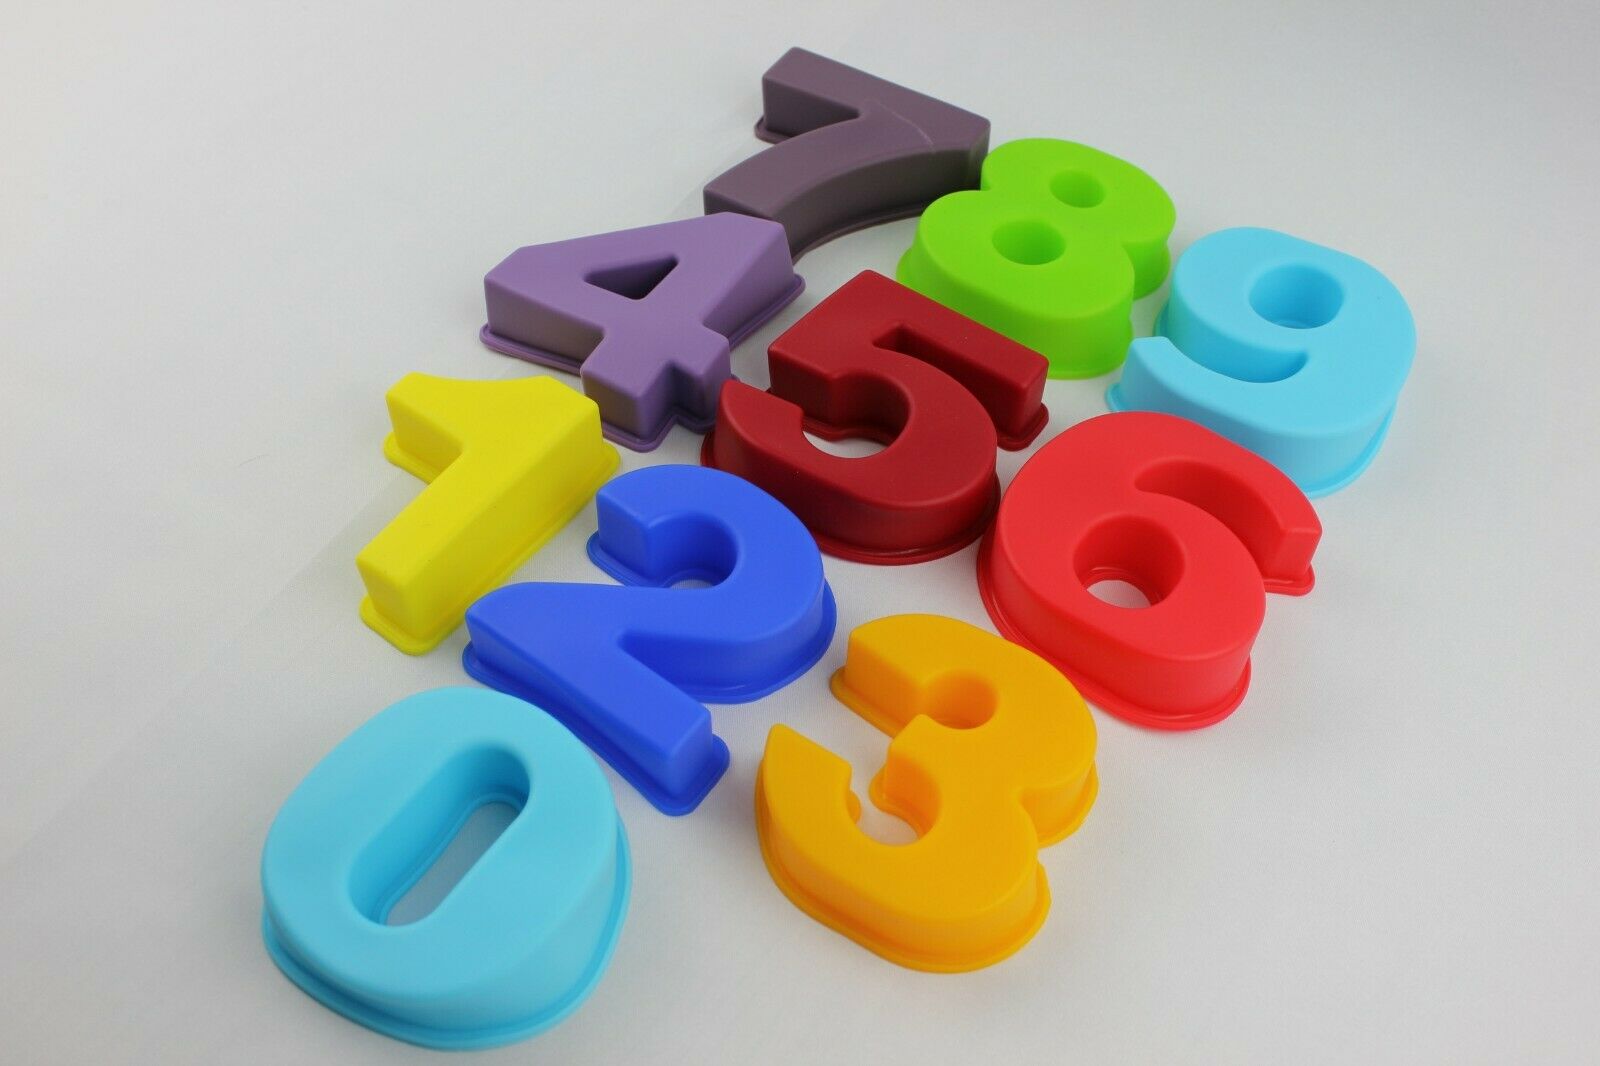 Cake Numbers Large Full Set Silicone Mould Birthday Bakeware Melts Ice Chocolate